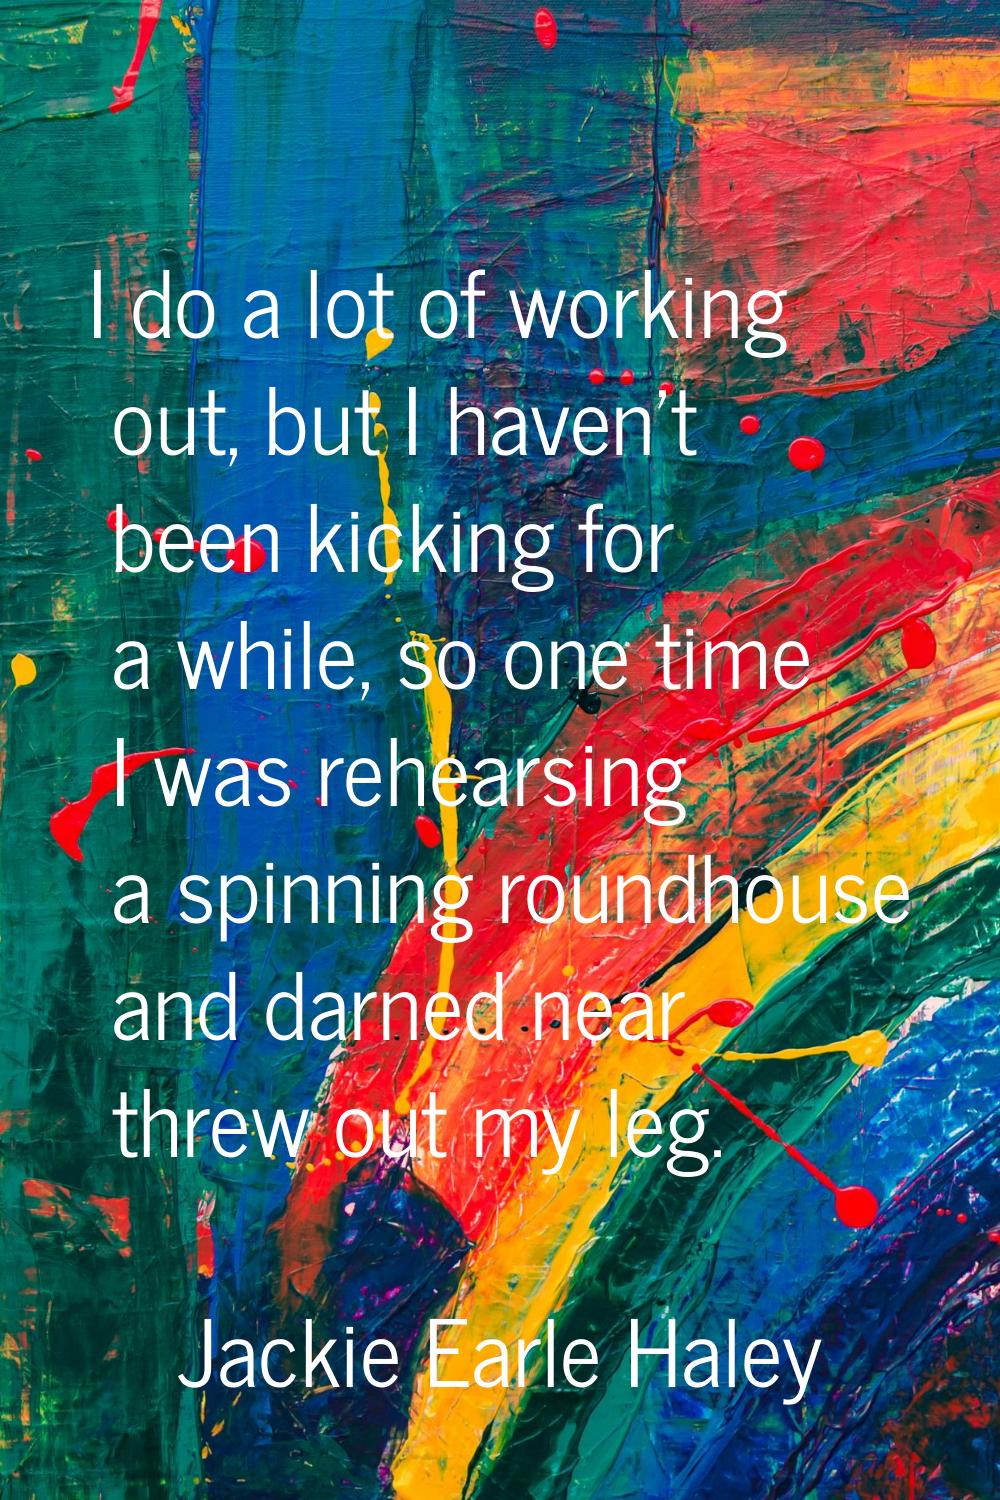 I do a lot of working out, but I haven't been kicking for a while, so one time I was rehearsing a s